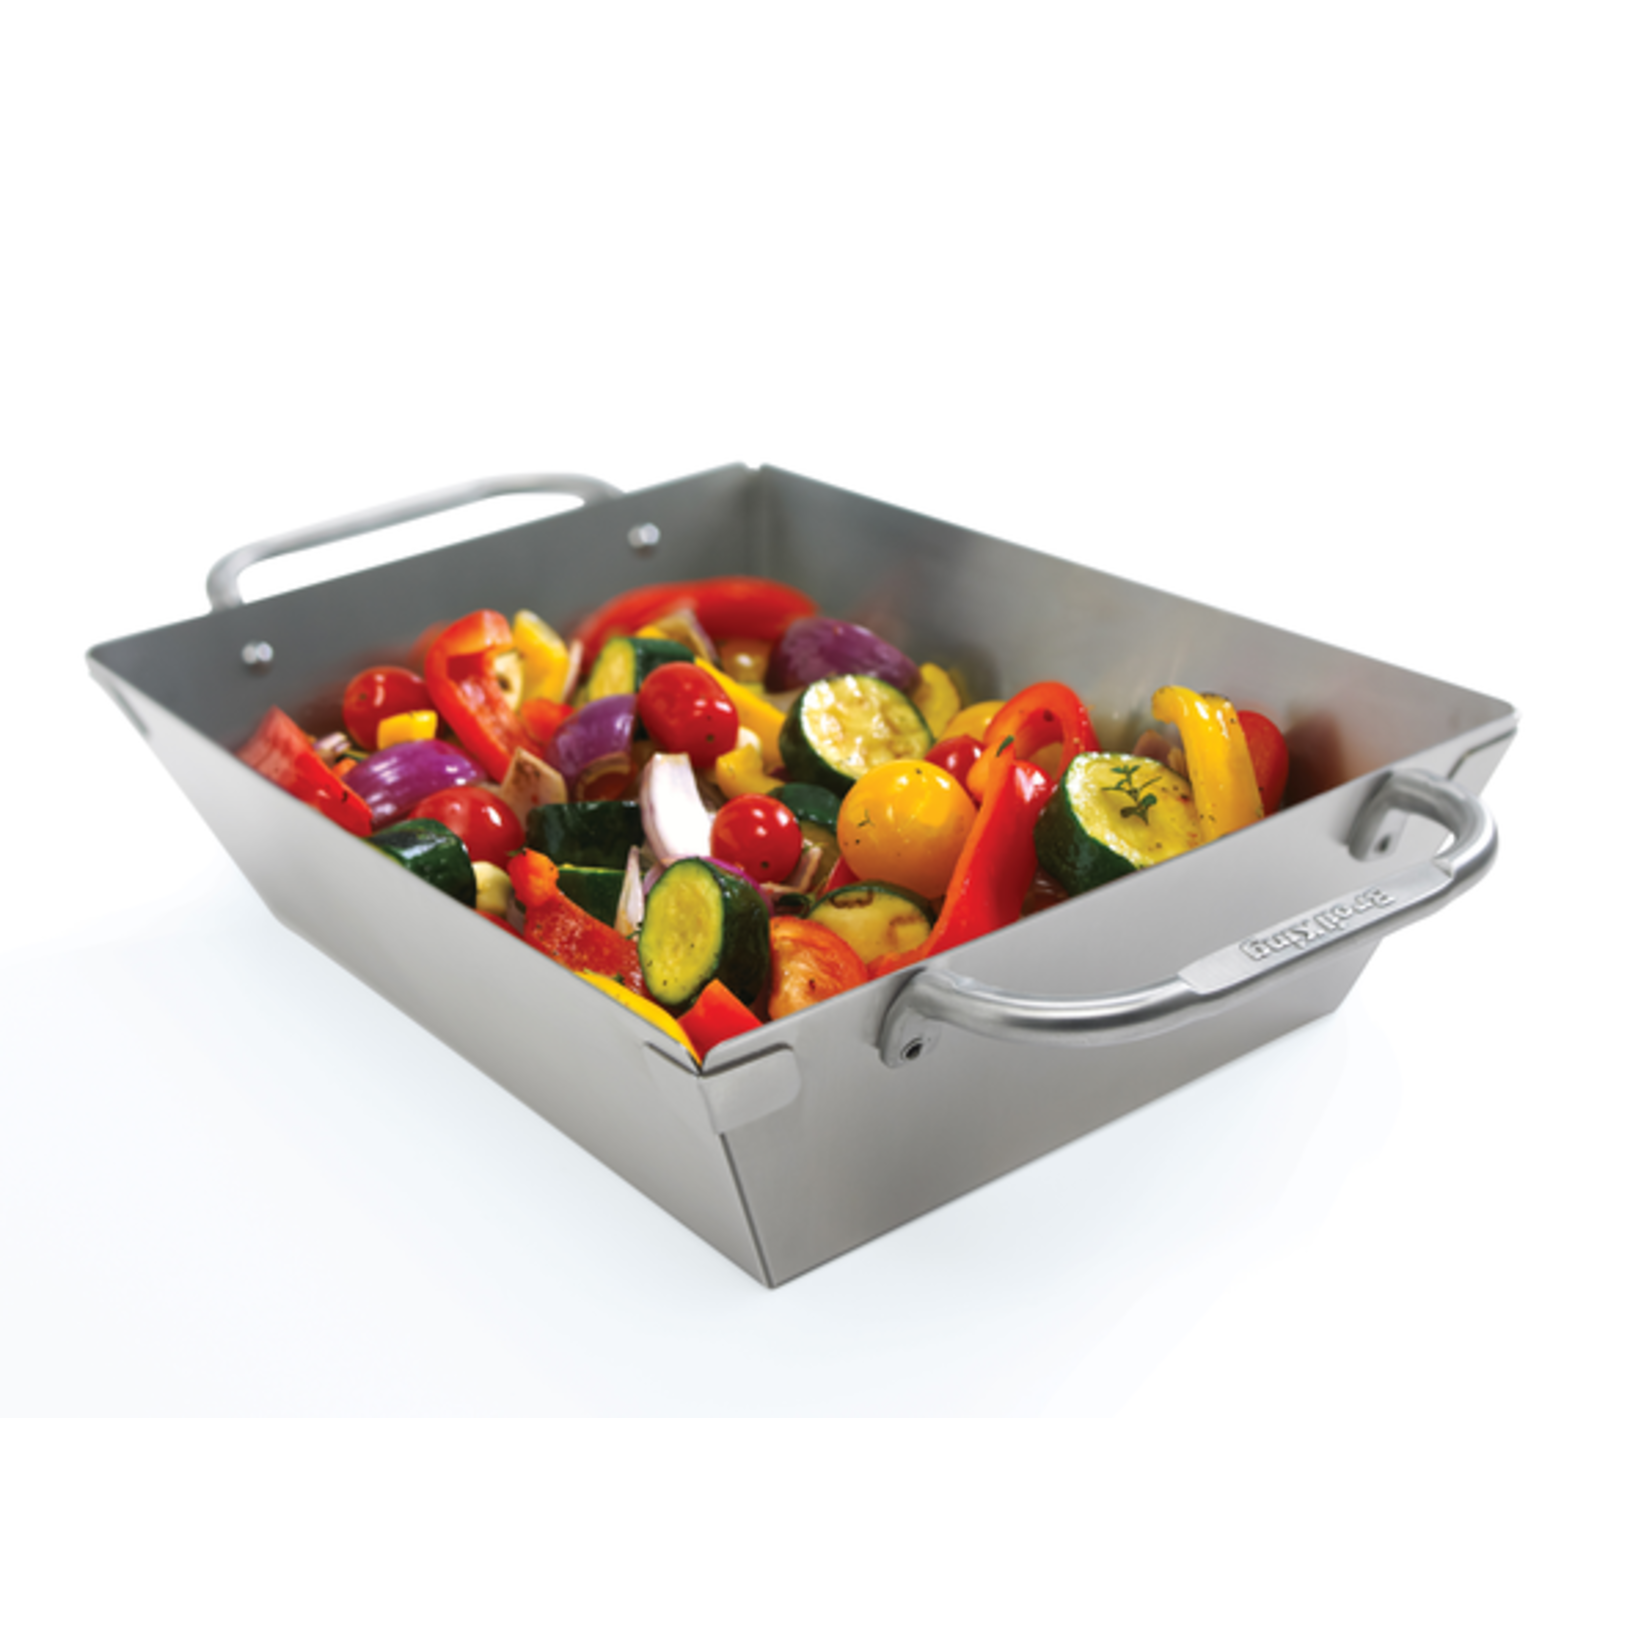 Broil King Grill Topper - Wok - Square - Stainless Steel